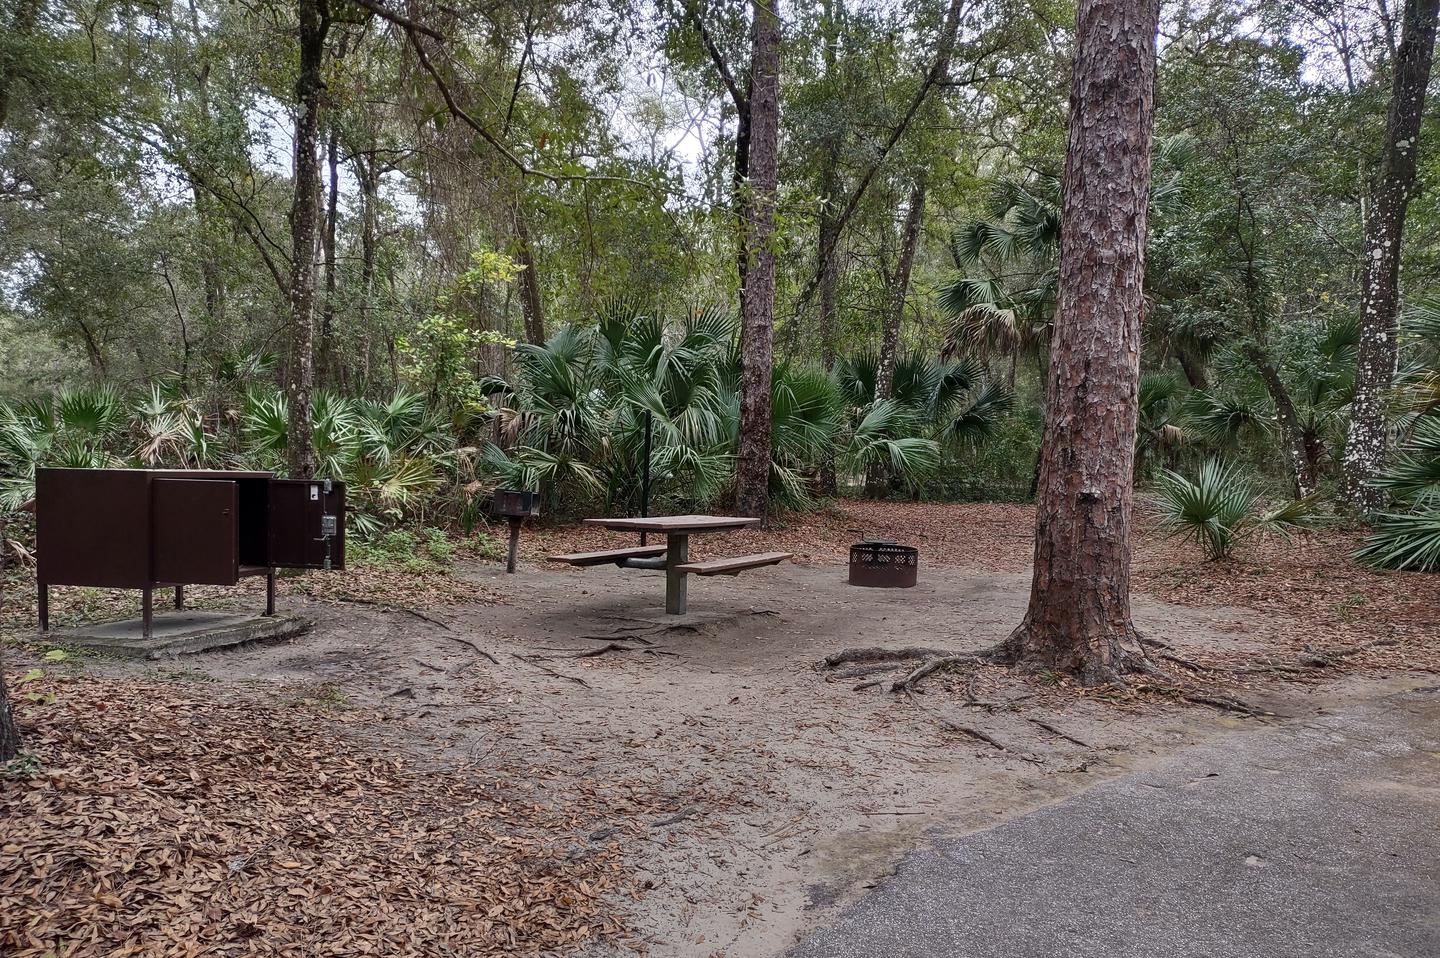 View of site 52Amenities: fire ring, picnic table, grill, light pole, bear-proof storage locker